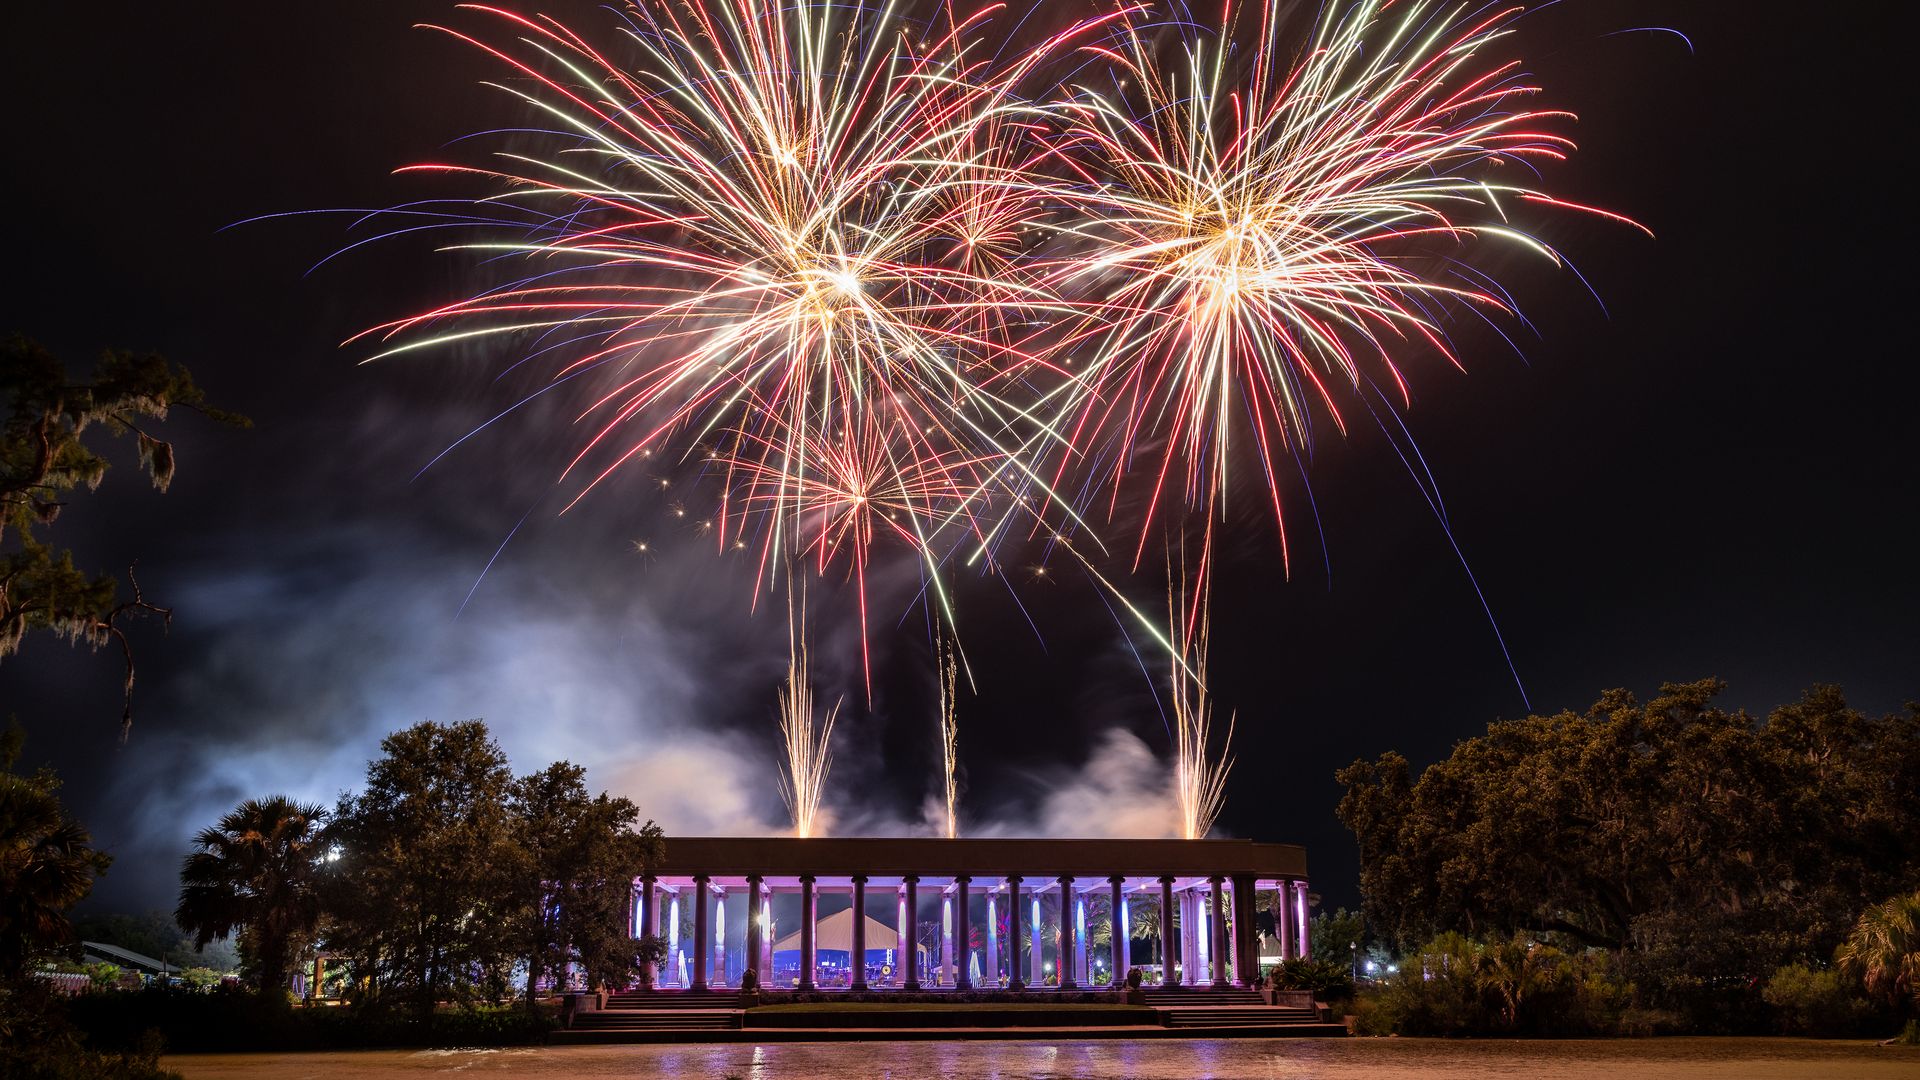 Photo shows a red, white and gold fireworks display exploding above the Peristyle, which is an open-air, columned building in City Park. It is night in the photo and trees are seen around the Peristyle.